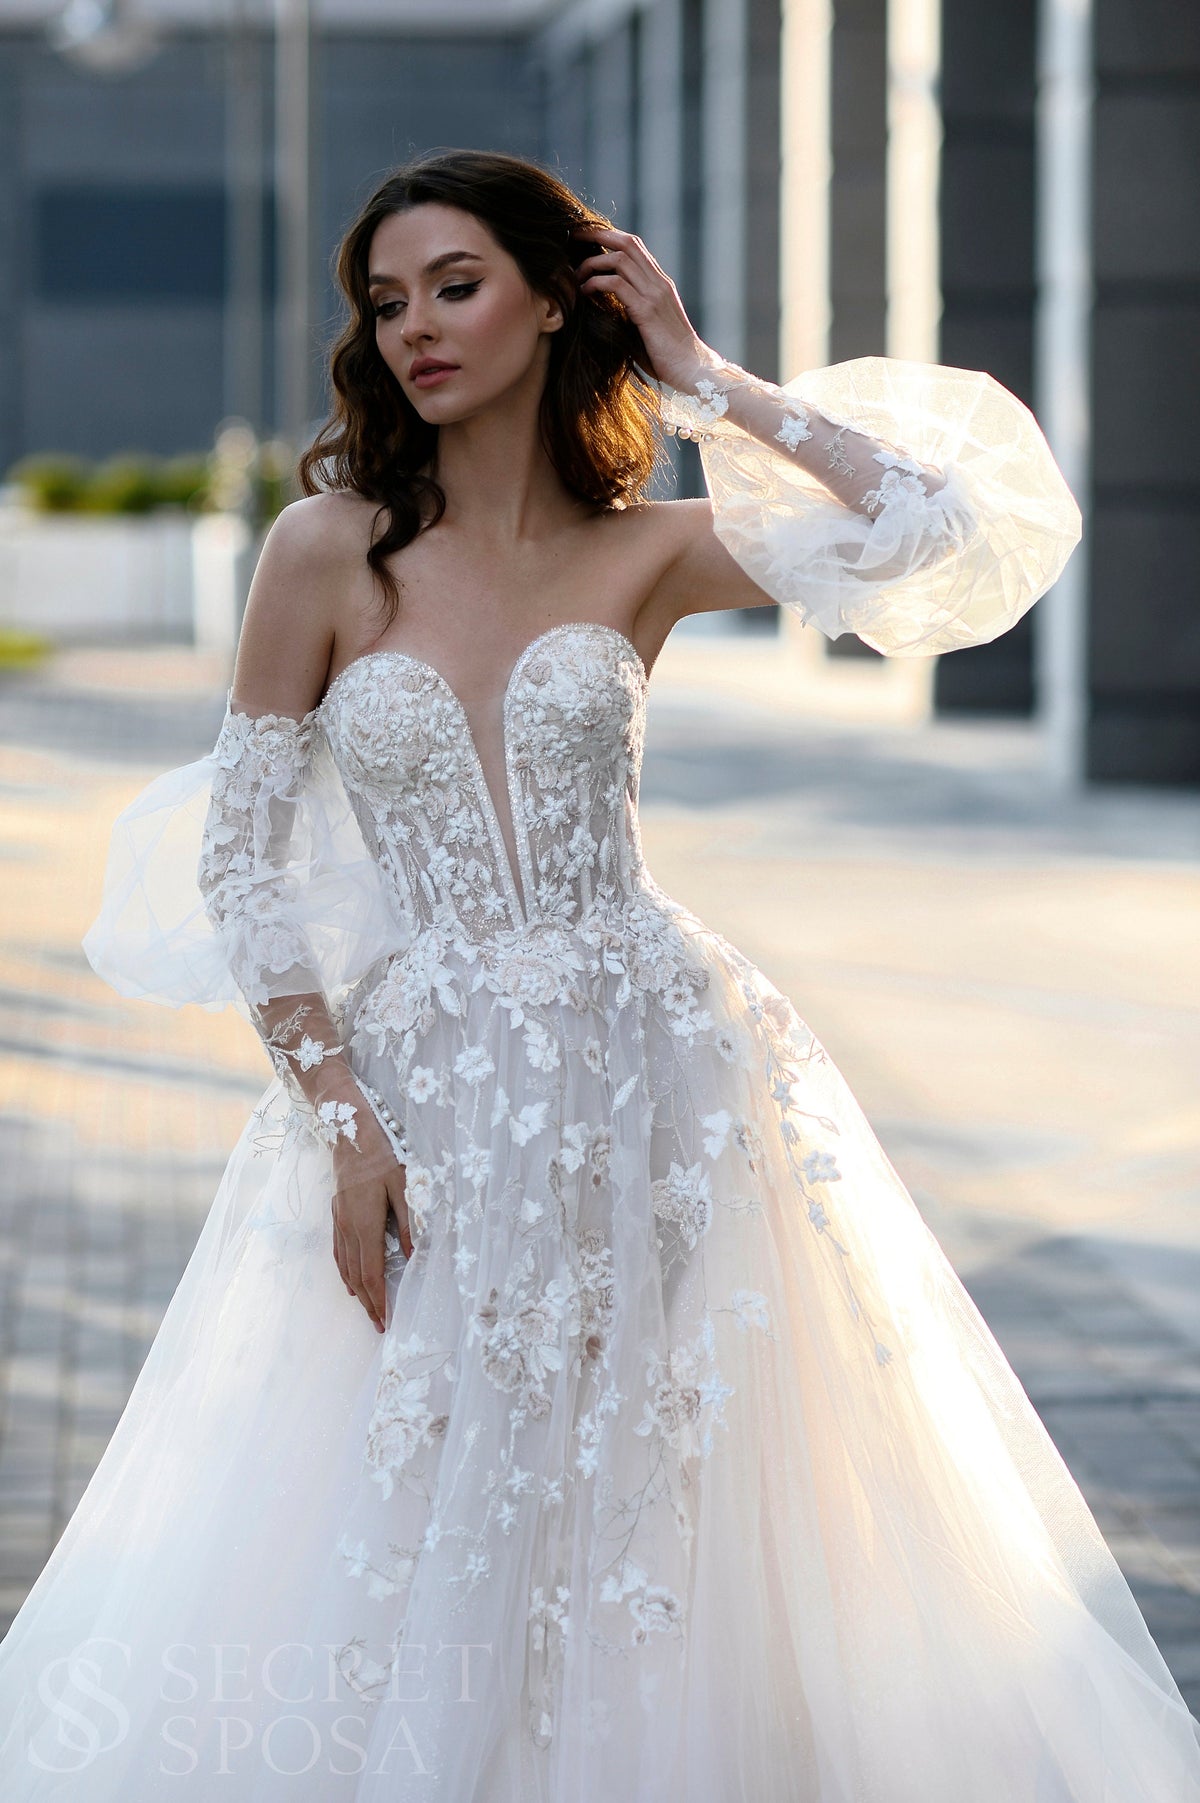 Classic Sleeveless Strapless Plunge Neckline Open Back Wedding Dress Bridal Gown Floral Lace Removable Sleeves Aline Silhouette